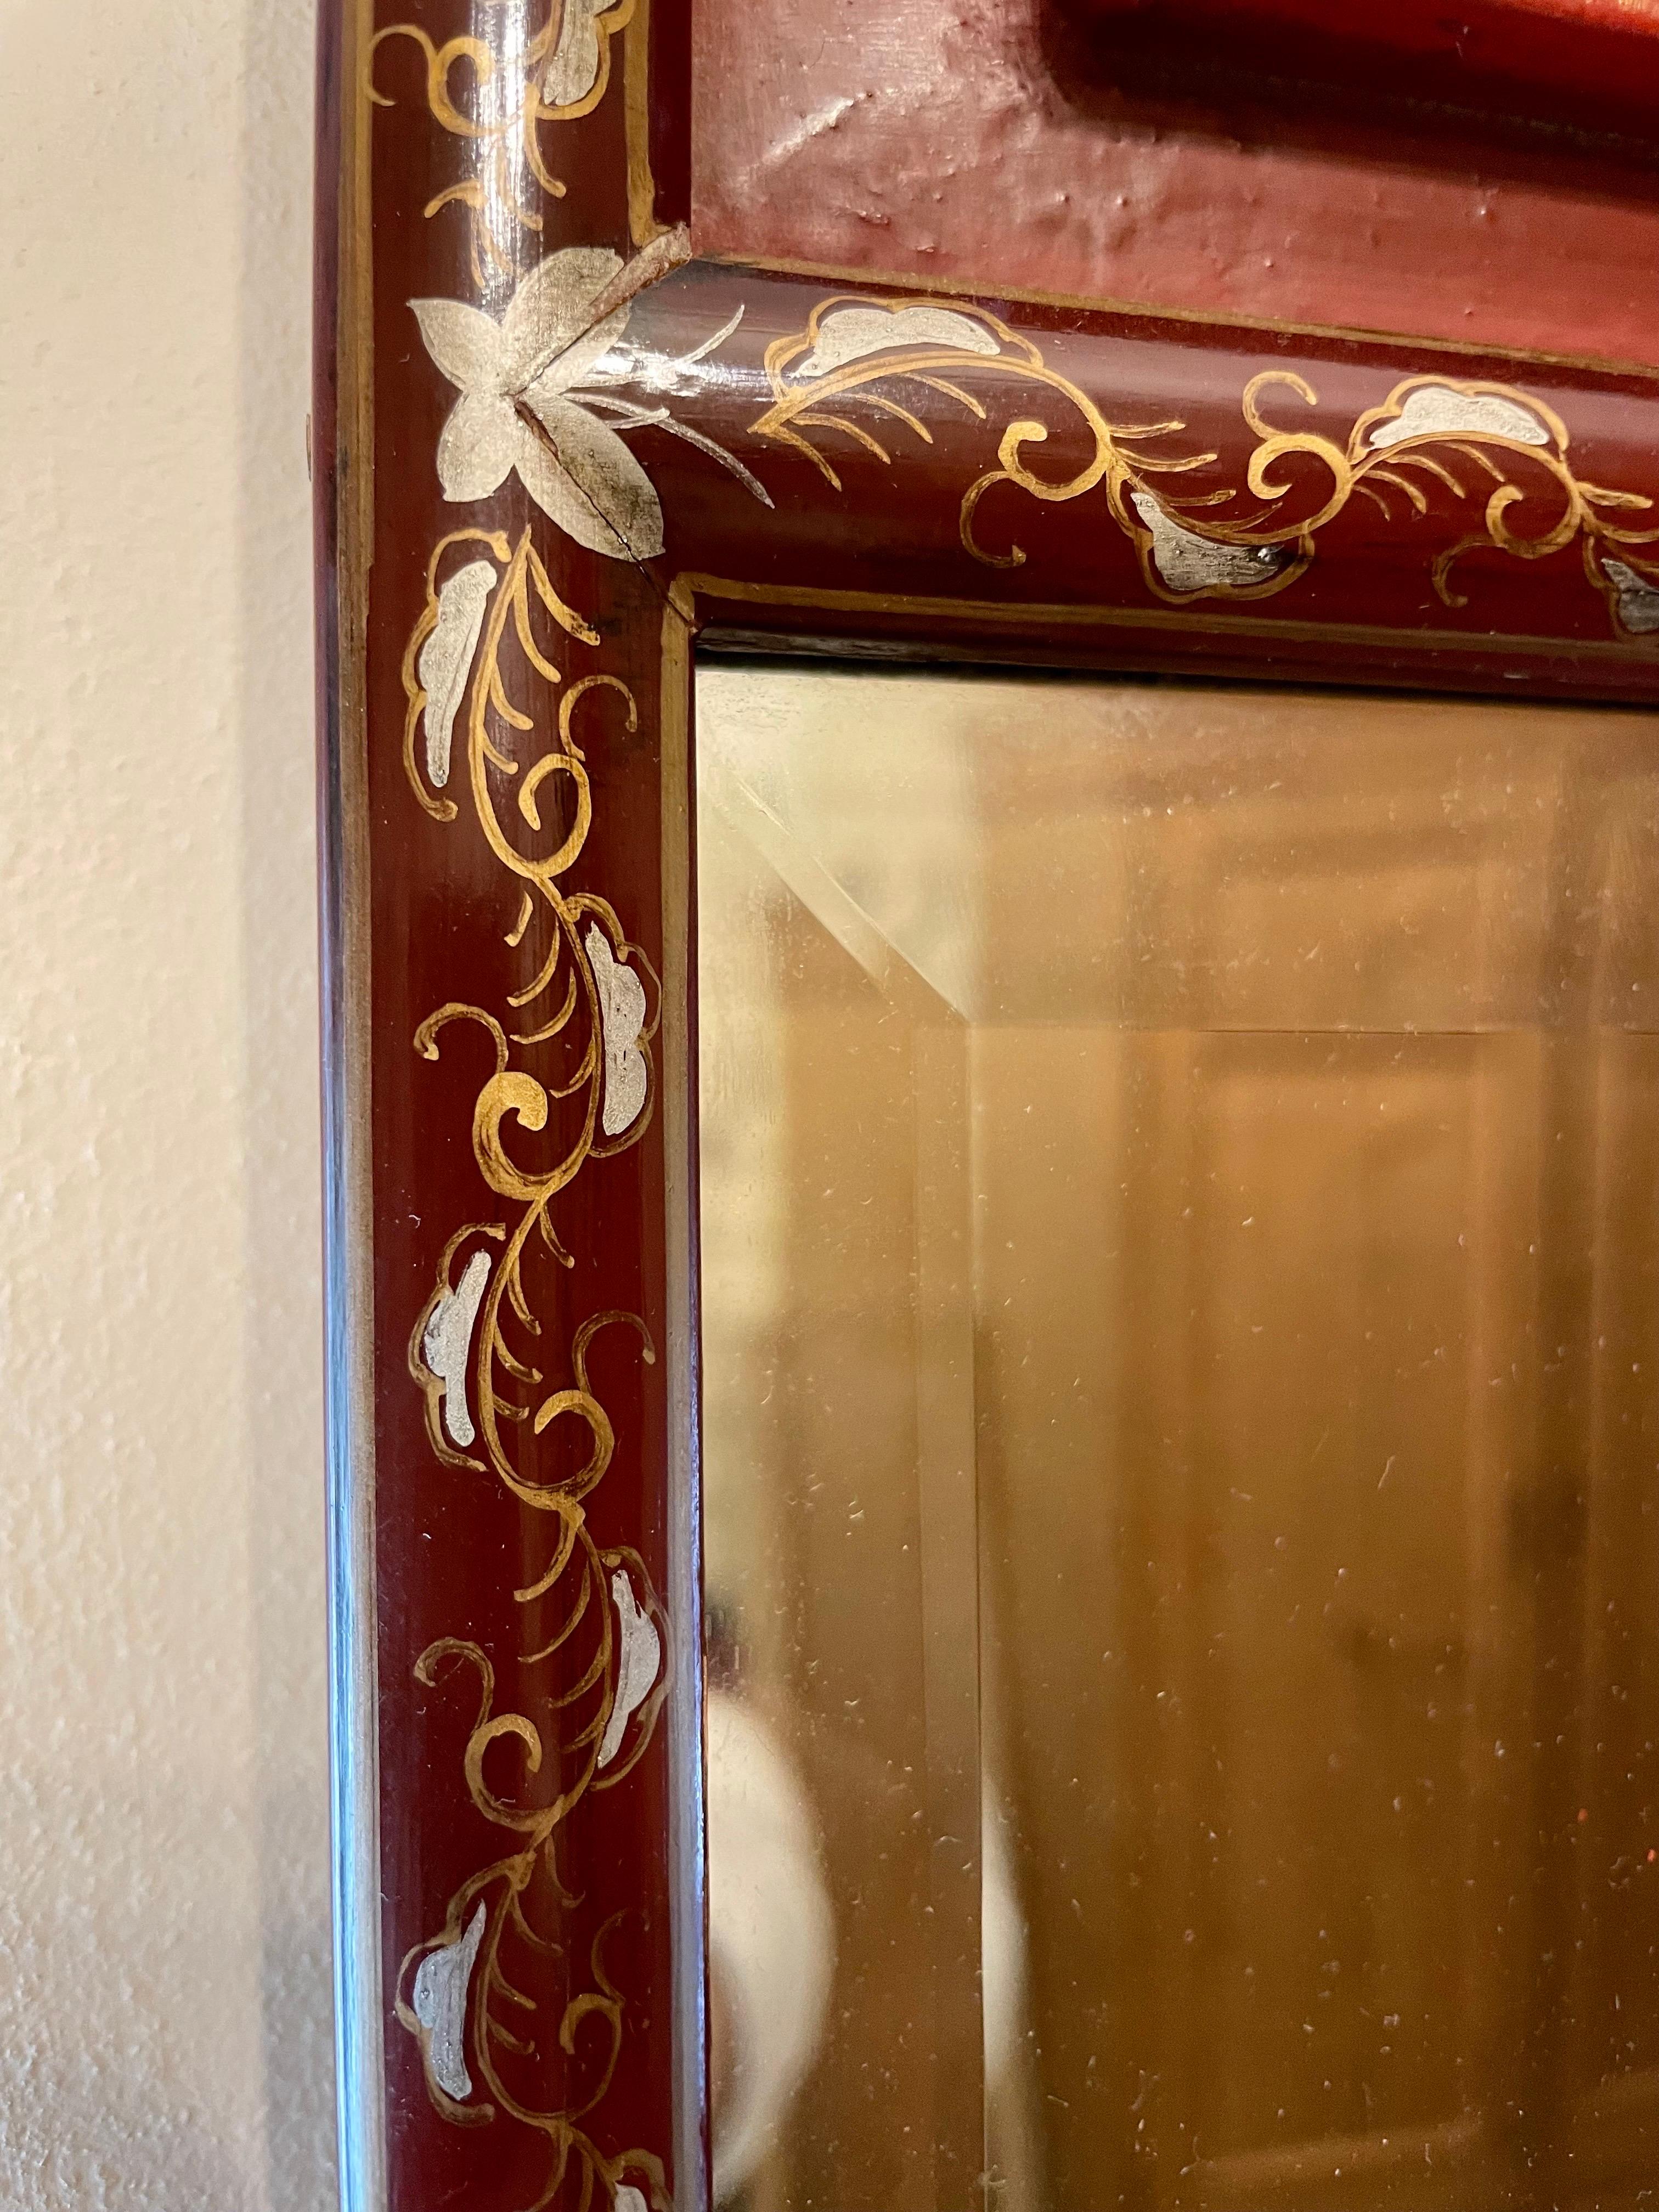 Chinese Carved Gilt  Beveled Mirror with painted details around oxblood colored lacquered wood frame. Carve panel at top is gold gilt finished. Brass detail at top. Wire on back for hanging. Very nice decorative mirror, good overall condition, with